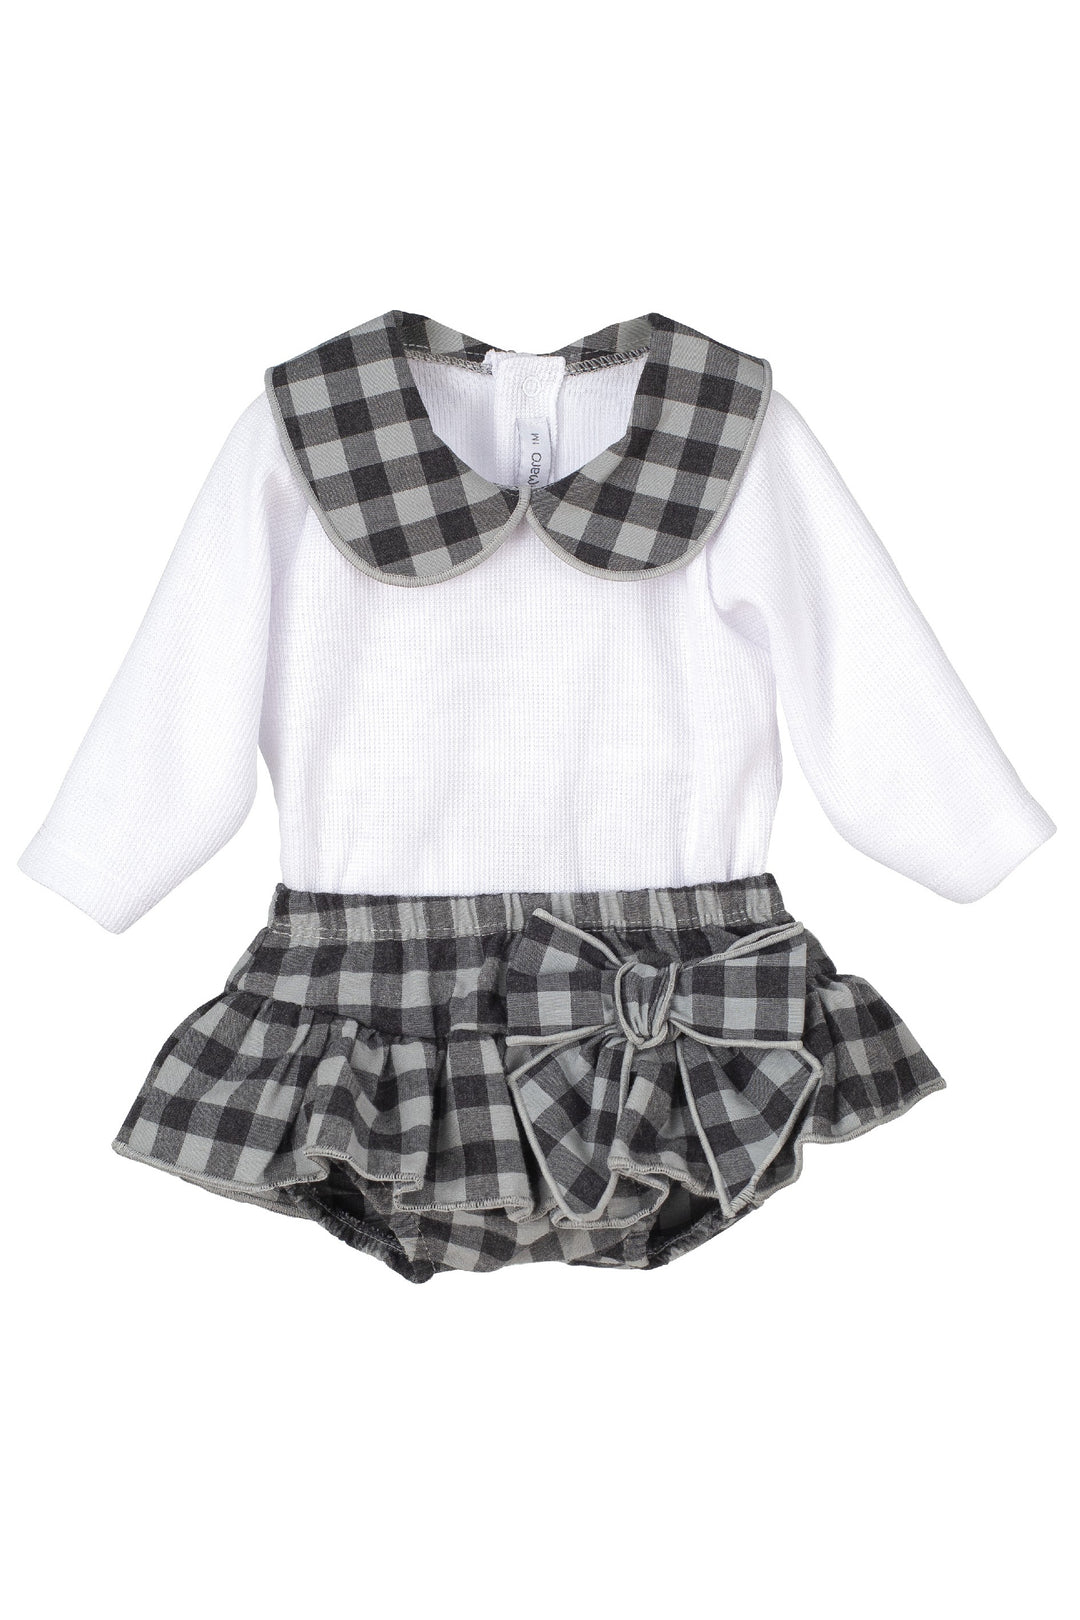 Calamaro "Indie" Charcoal Checked Blouse & Bloomers | Millie and John